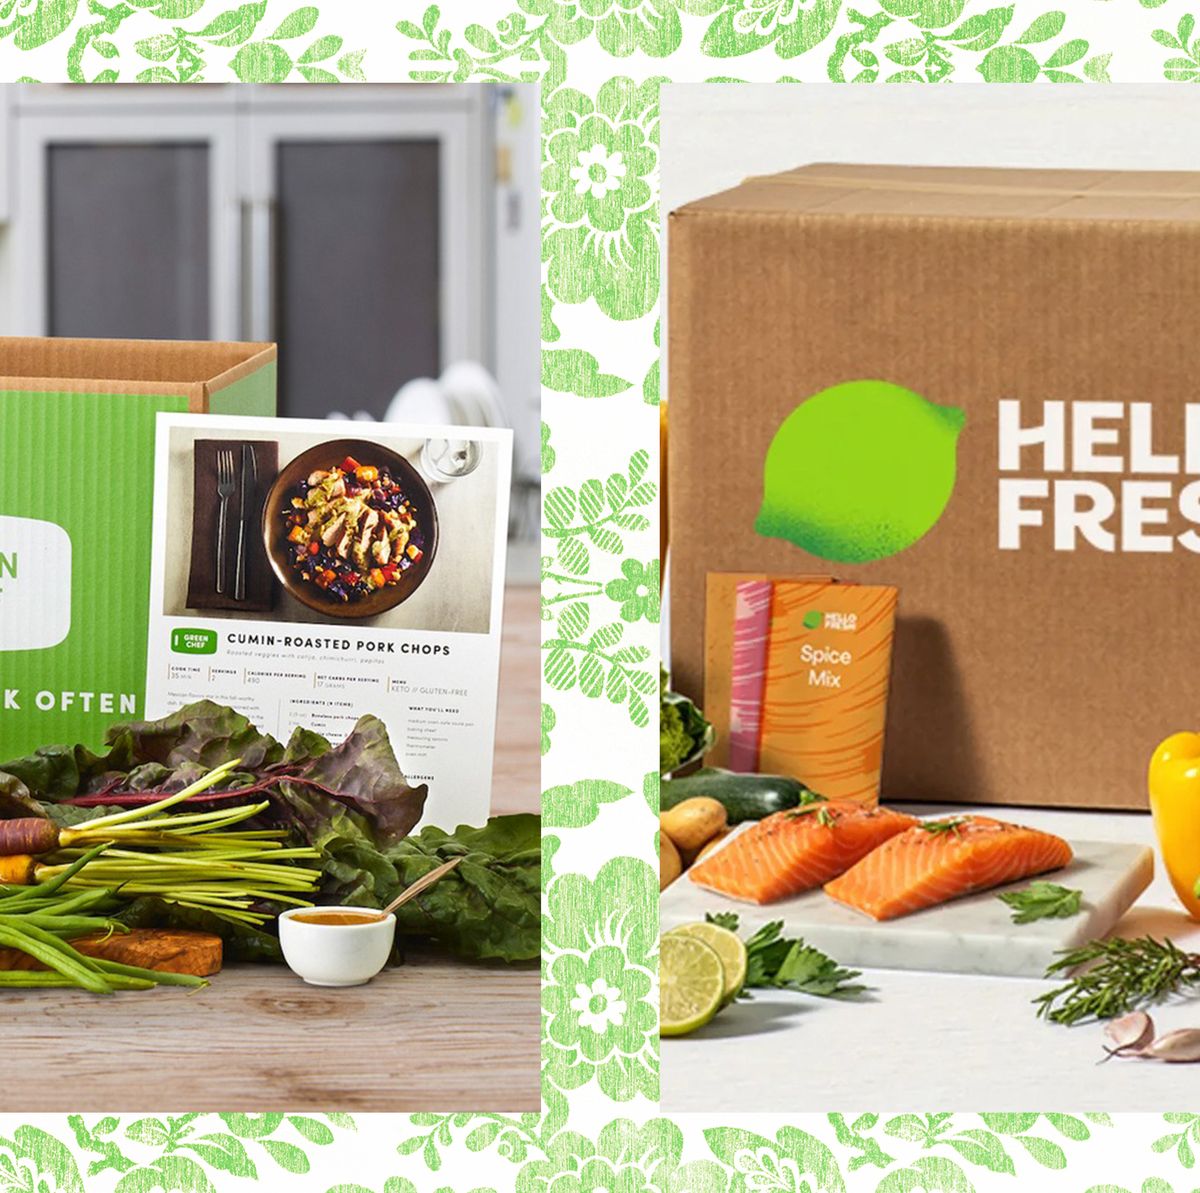 8 Best Meal Kit Delivery Services (2023): Blue Apron, Dinnerly, and More